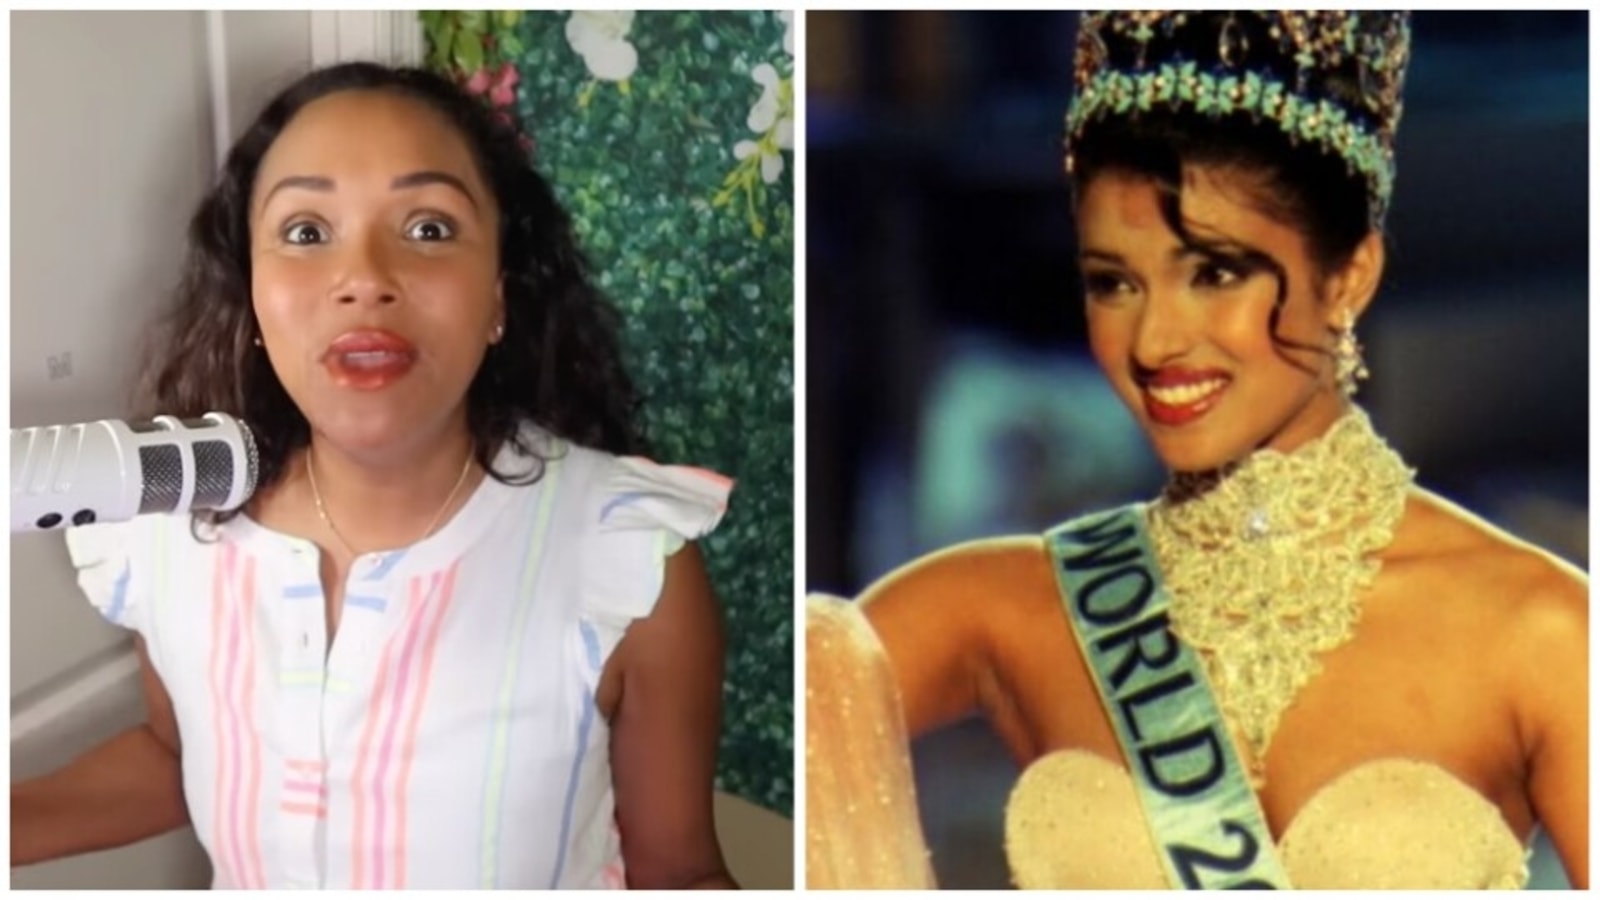 priyanka-chopra-was-unlikable-former-miss-barbados-says-miss-world-2000-was-rigged-in-india-s-favour